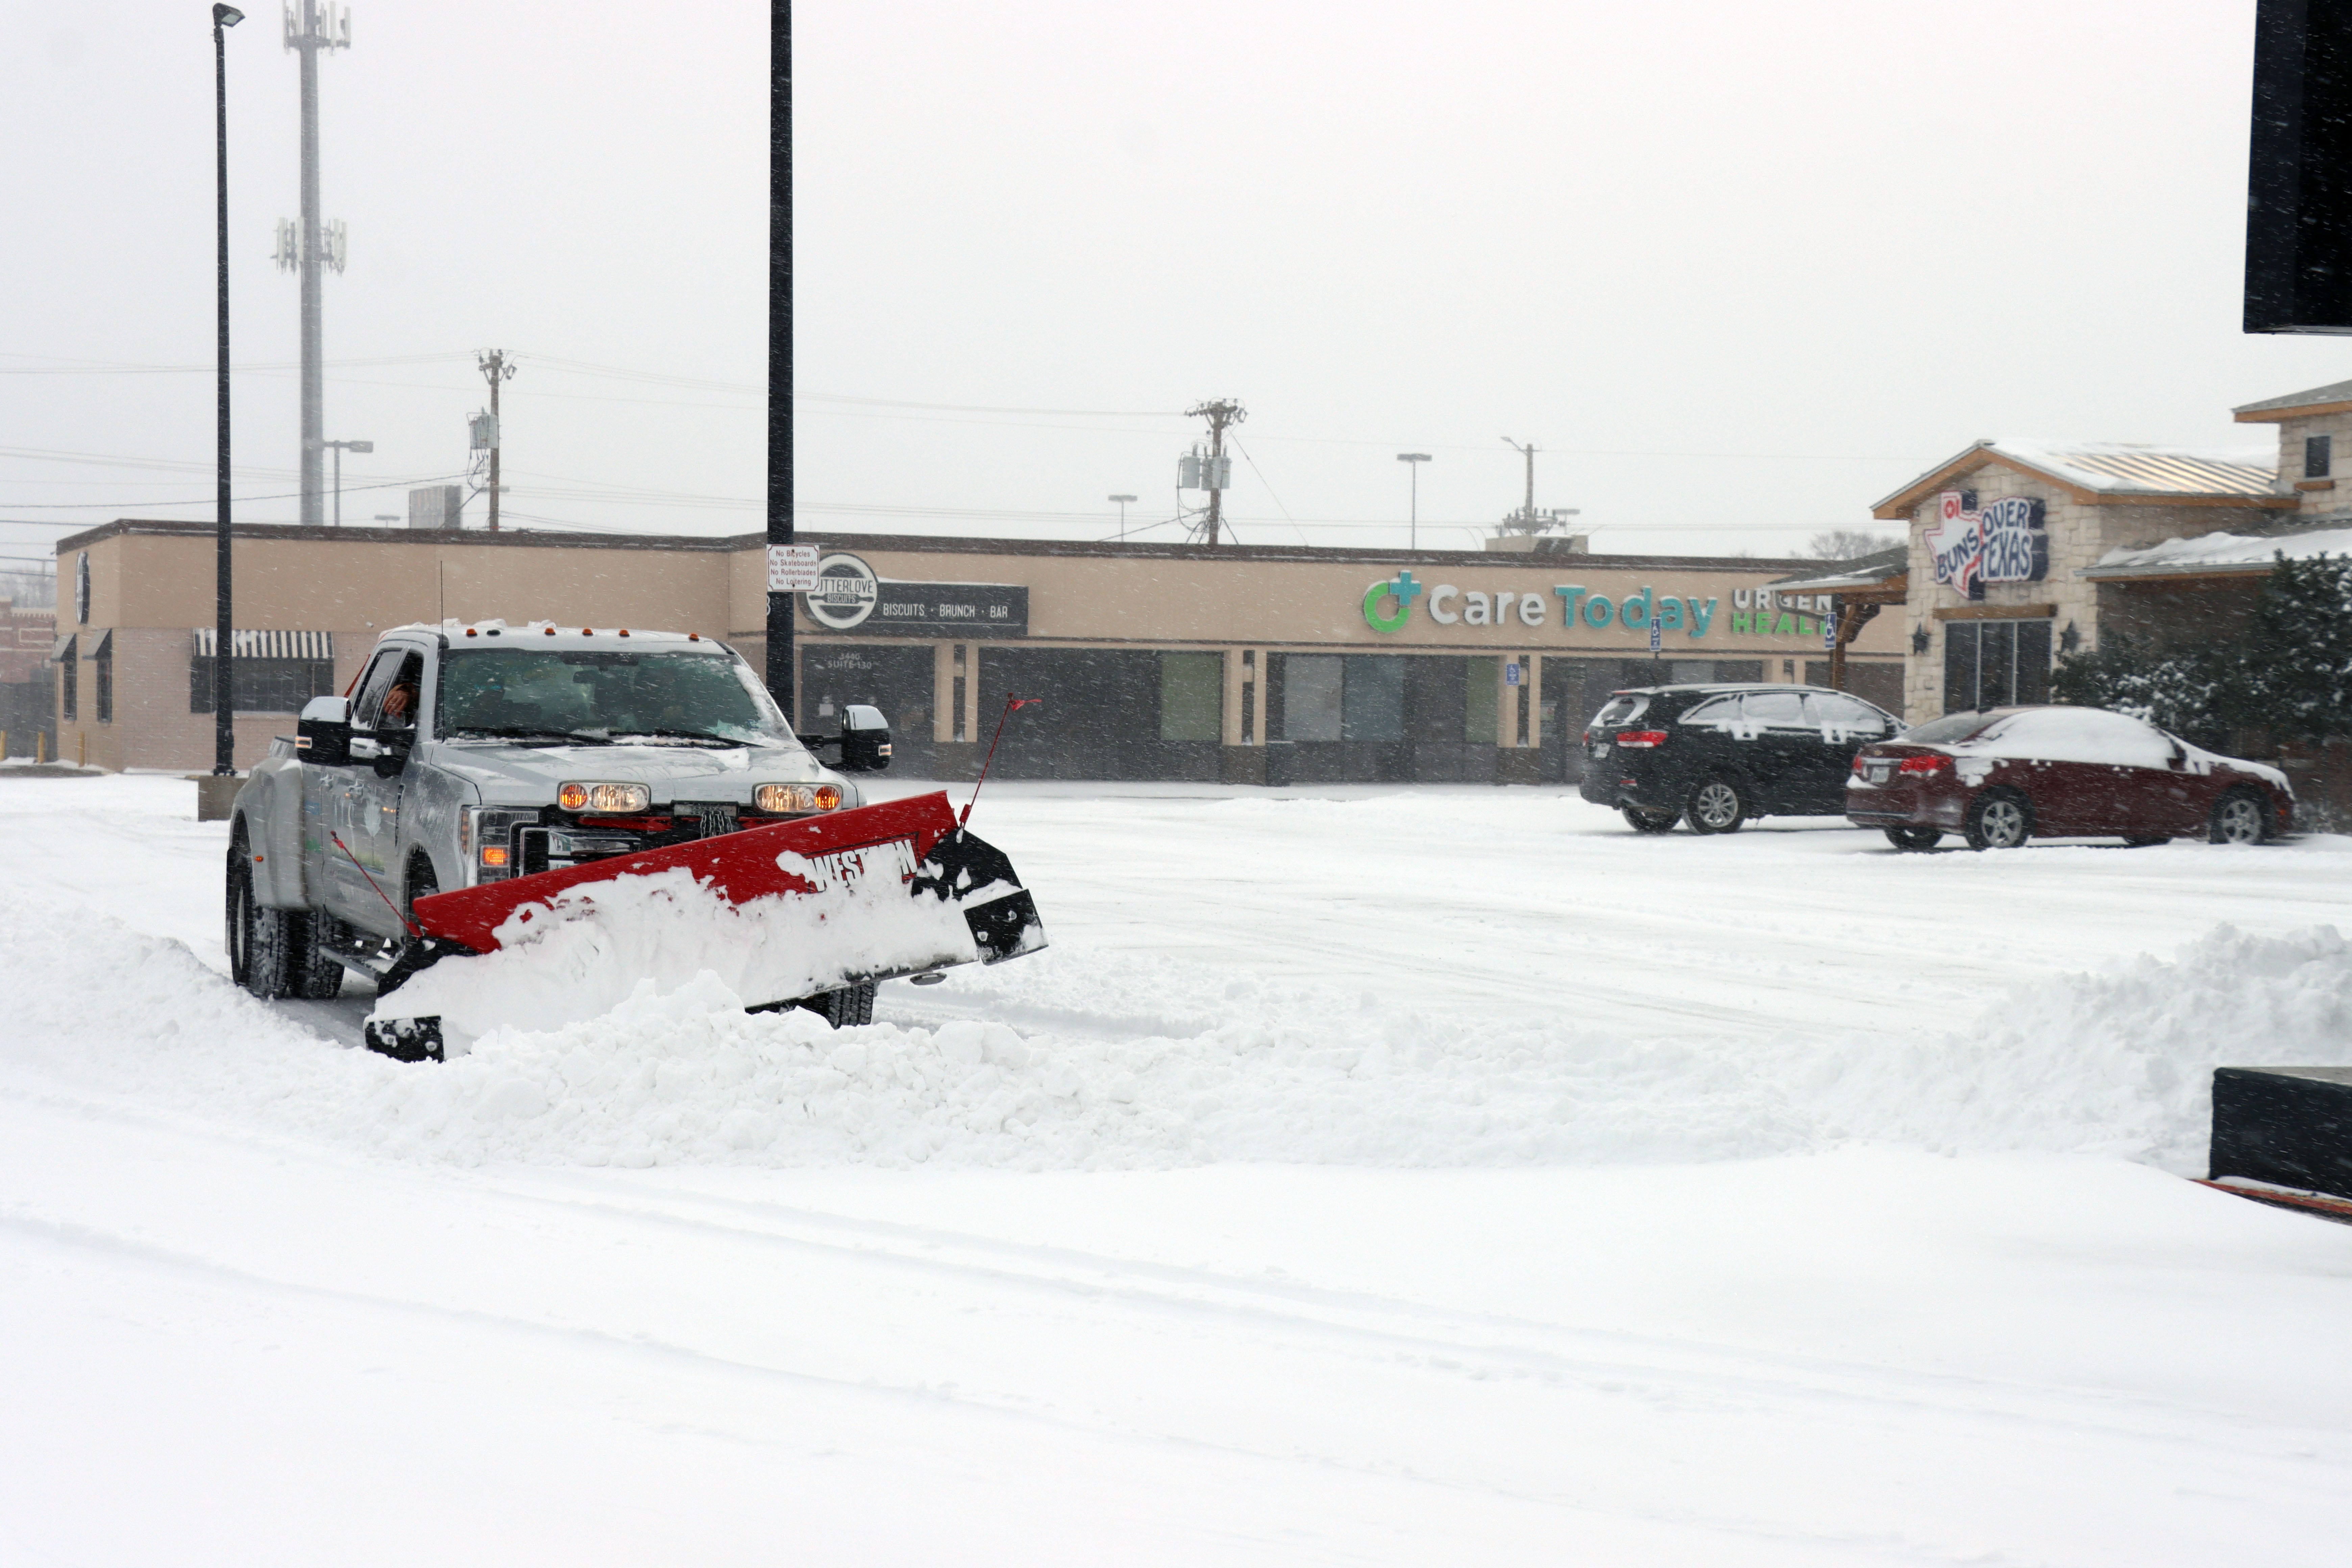 Amarillo Land Services was among the providers working to remove snow from parking lots during Sunday's winter storm.